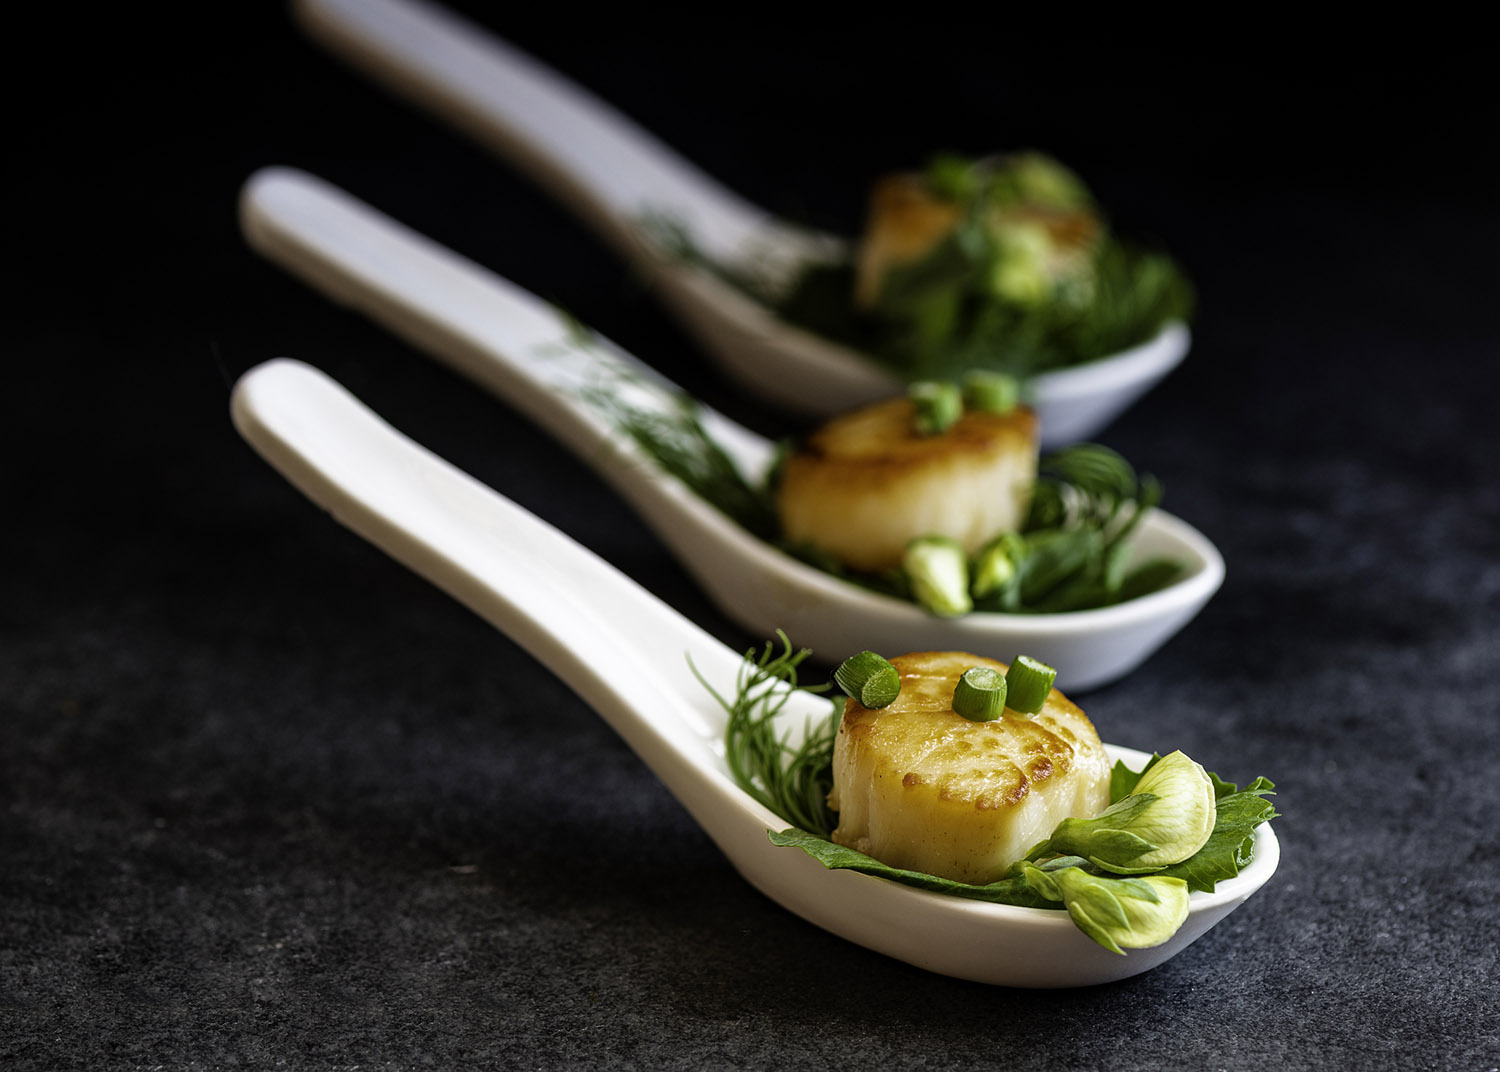 Scallops seared in a cast-iron pan with butter and garlic scapes. Served in ceramic spoons as an appetizer on a bed of pea tendrils and blossoms.